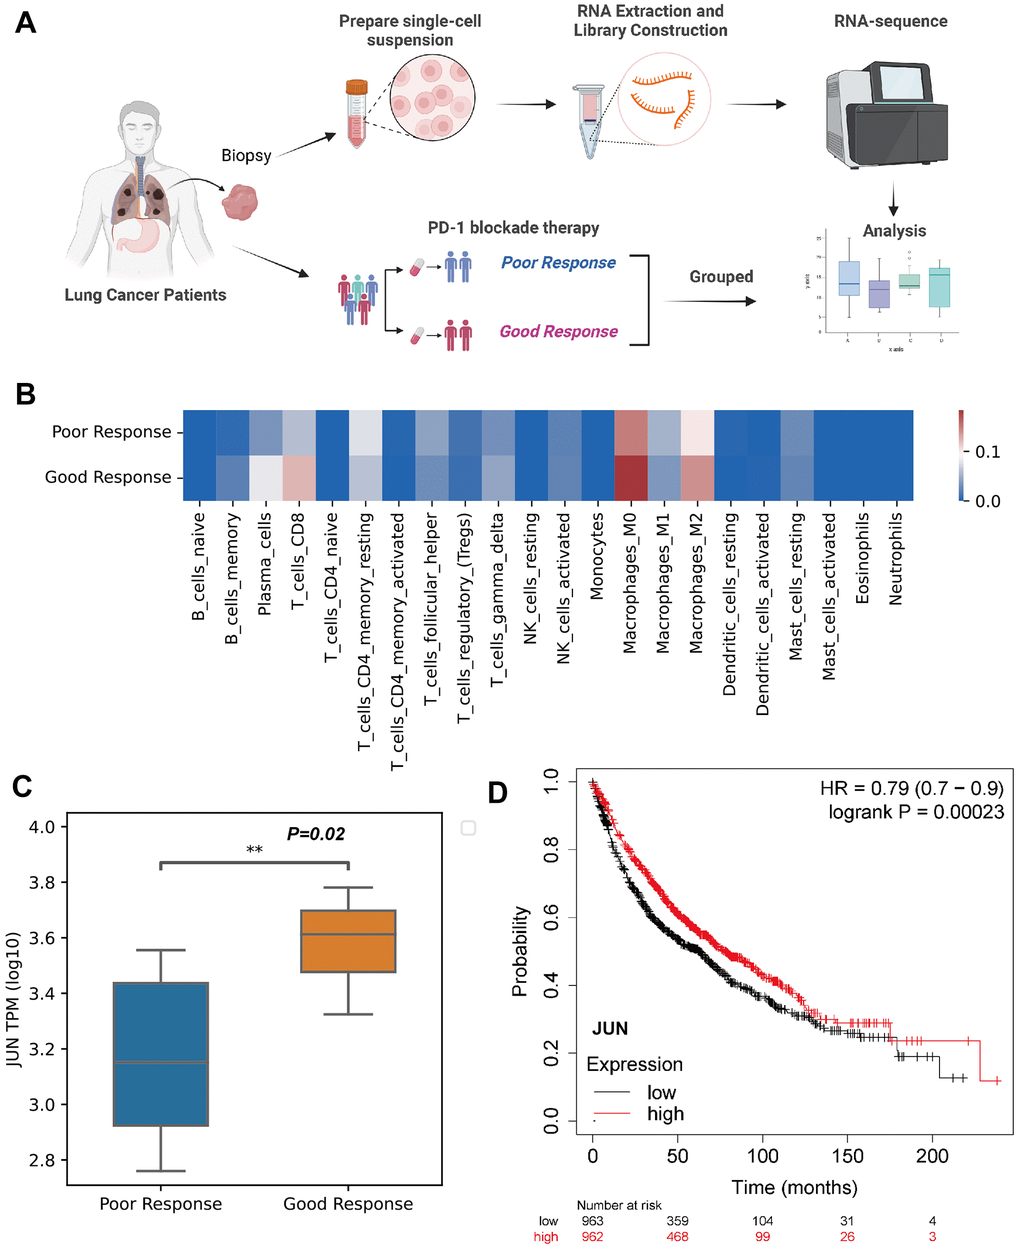 Validation of JUN expression in the CD8 lymphocytes as an indicative biomarker of sensitivity to PD-1 blockade in lung adenocarcinoma. (A) Schematic showing the RNA-seq validation of procedures used for JUN gene (created using BioRender.com). (B) Heat map of immune cell fractions in the microenvironment of lung cancer patients (n=17, LUAD: 3 patients, LUSC: 14 patients). (C) Box and whisker plot showing the JUN expression level of poor or good response for PD-1 blockade therapy in lung cancer patients using RNA sequence (TPM; Log10; good response: n = 8; poor response: n = 9; P=0.02) with non-parametric Wilcoxon test. (D) Kaplan-Meier plotter showing the probability of JUN in lung cancer patients (Logrank test, P=0.00023).